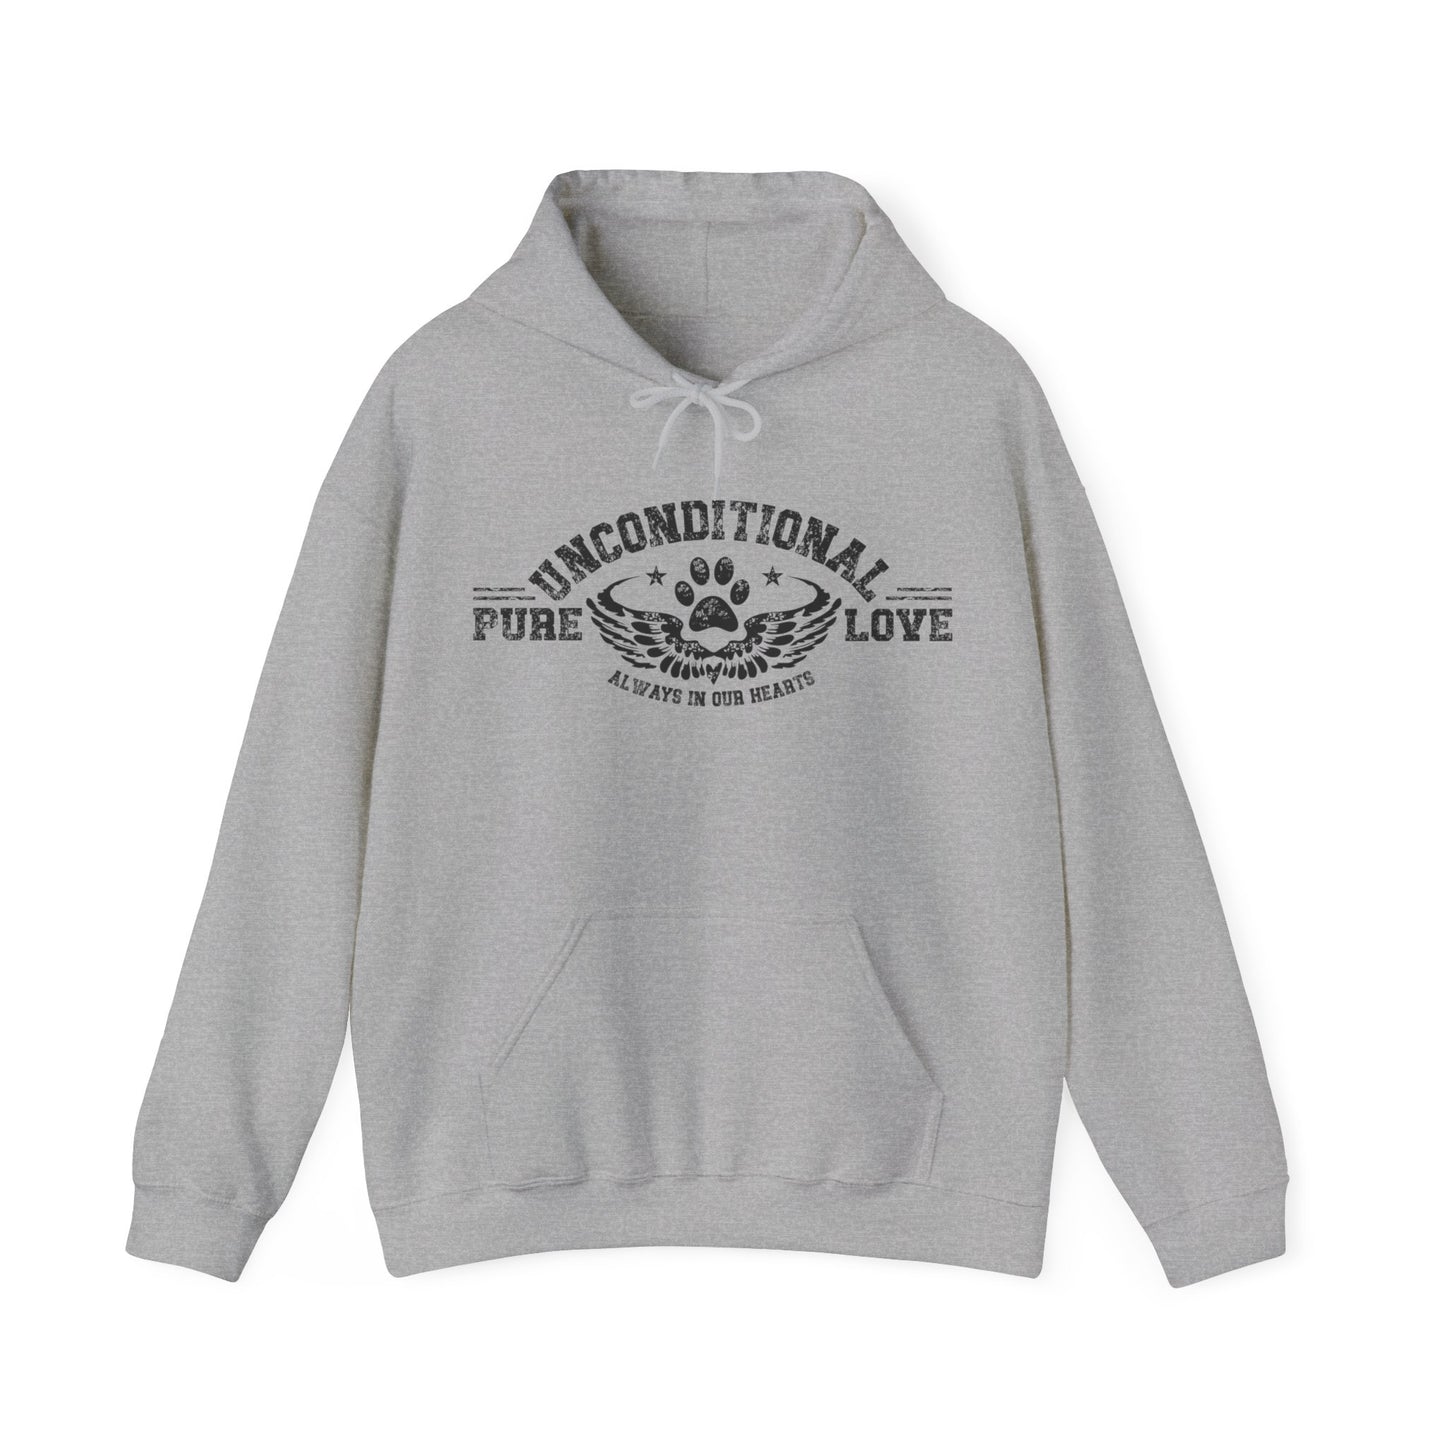  The Dogs Pure Love unisex hoodie, crafted in sport grey, elegantly showcases the empowering slogan 'Unconditional Pure Love, always in our hearts.' This impactful message stands out against a pristine white background.